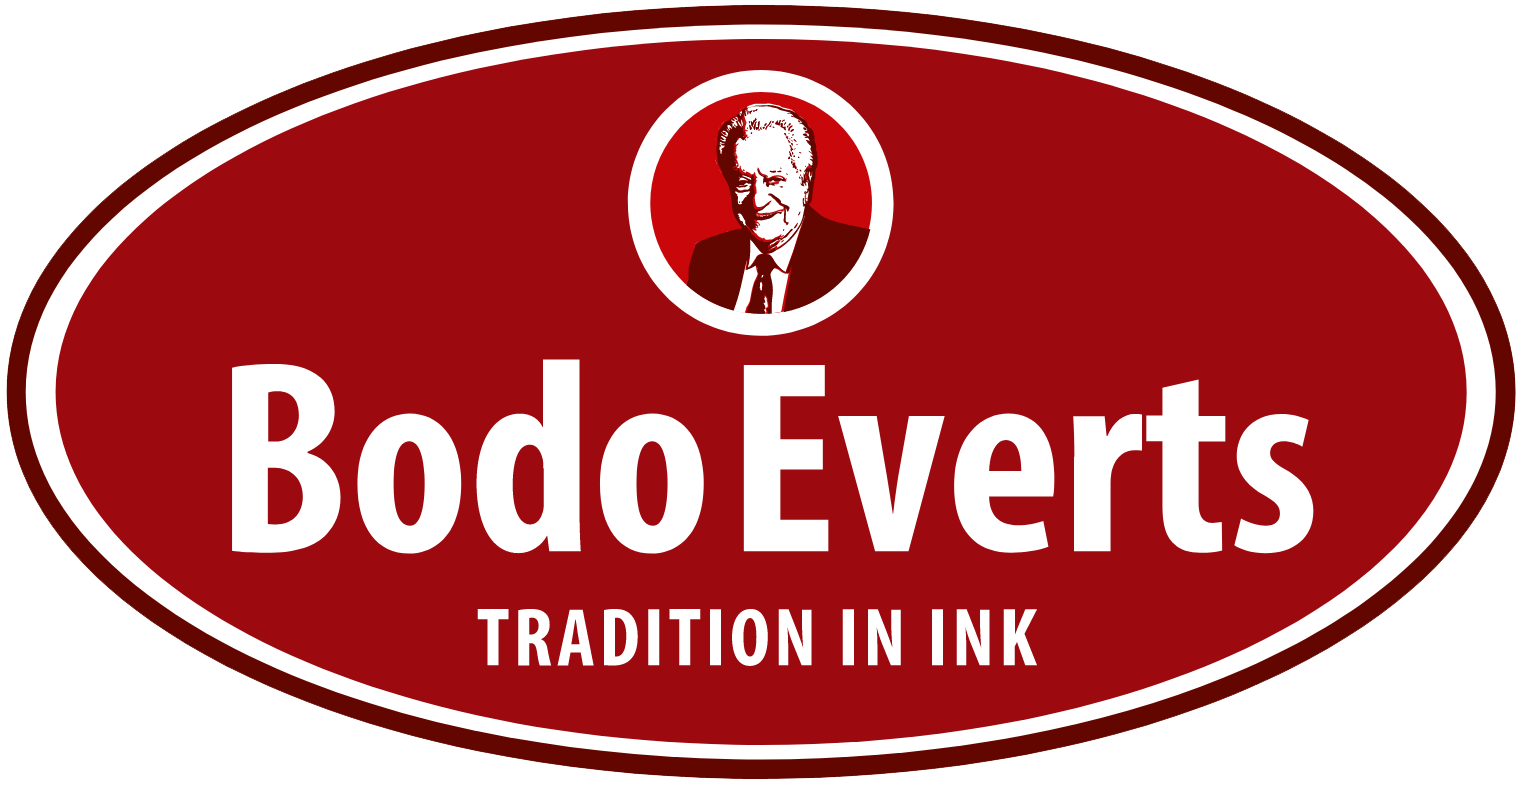 EVERTS AG Logo with Bodo Everts tradition in ink balloon printing ink